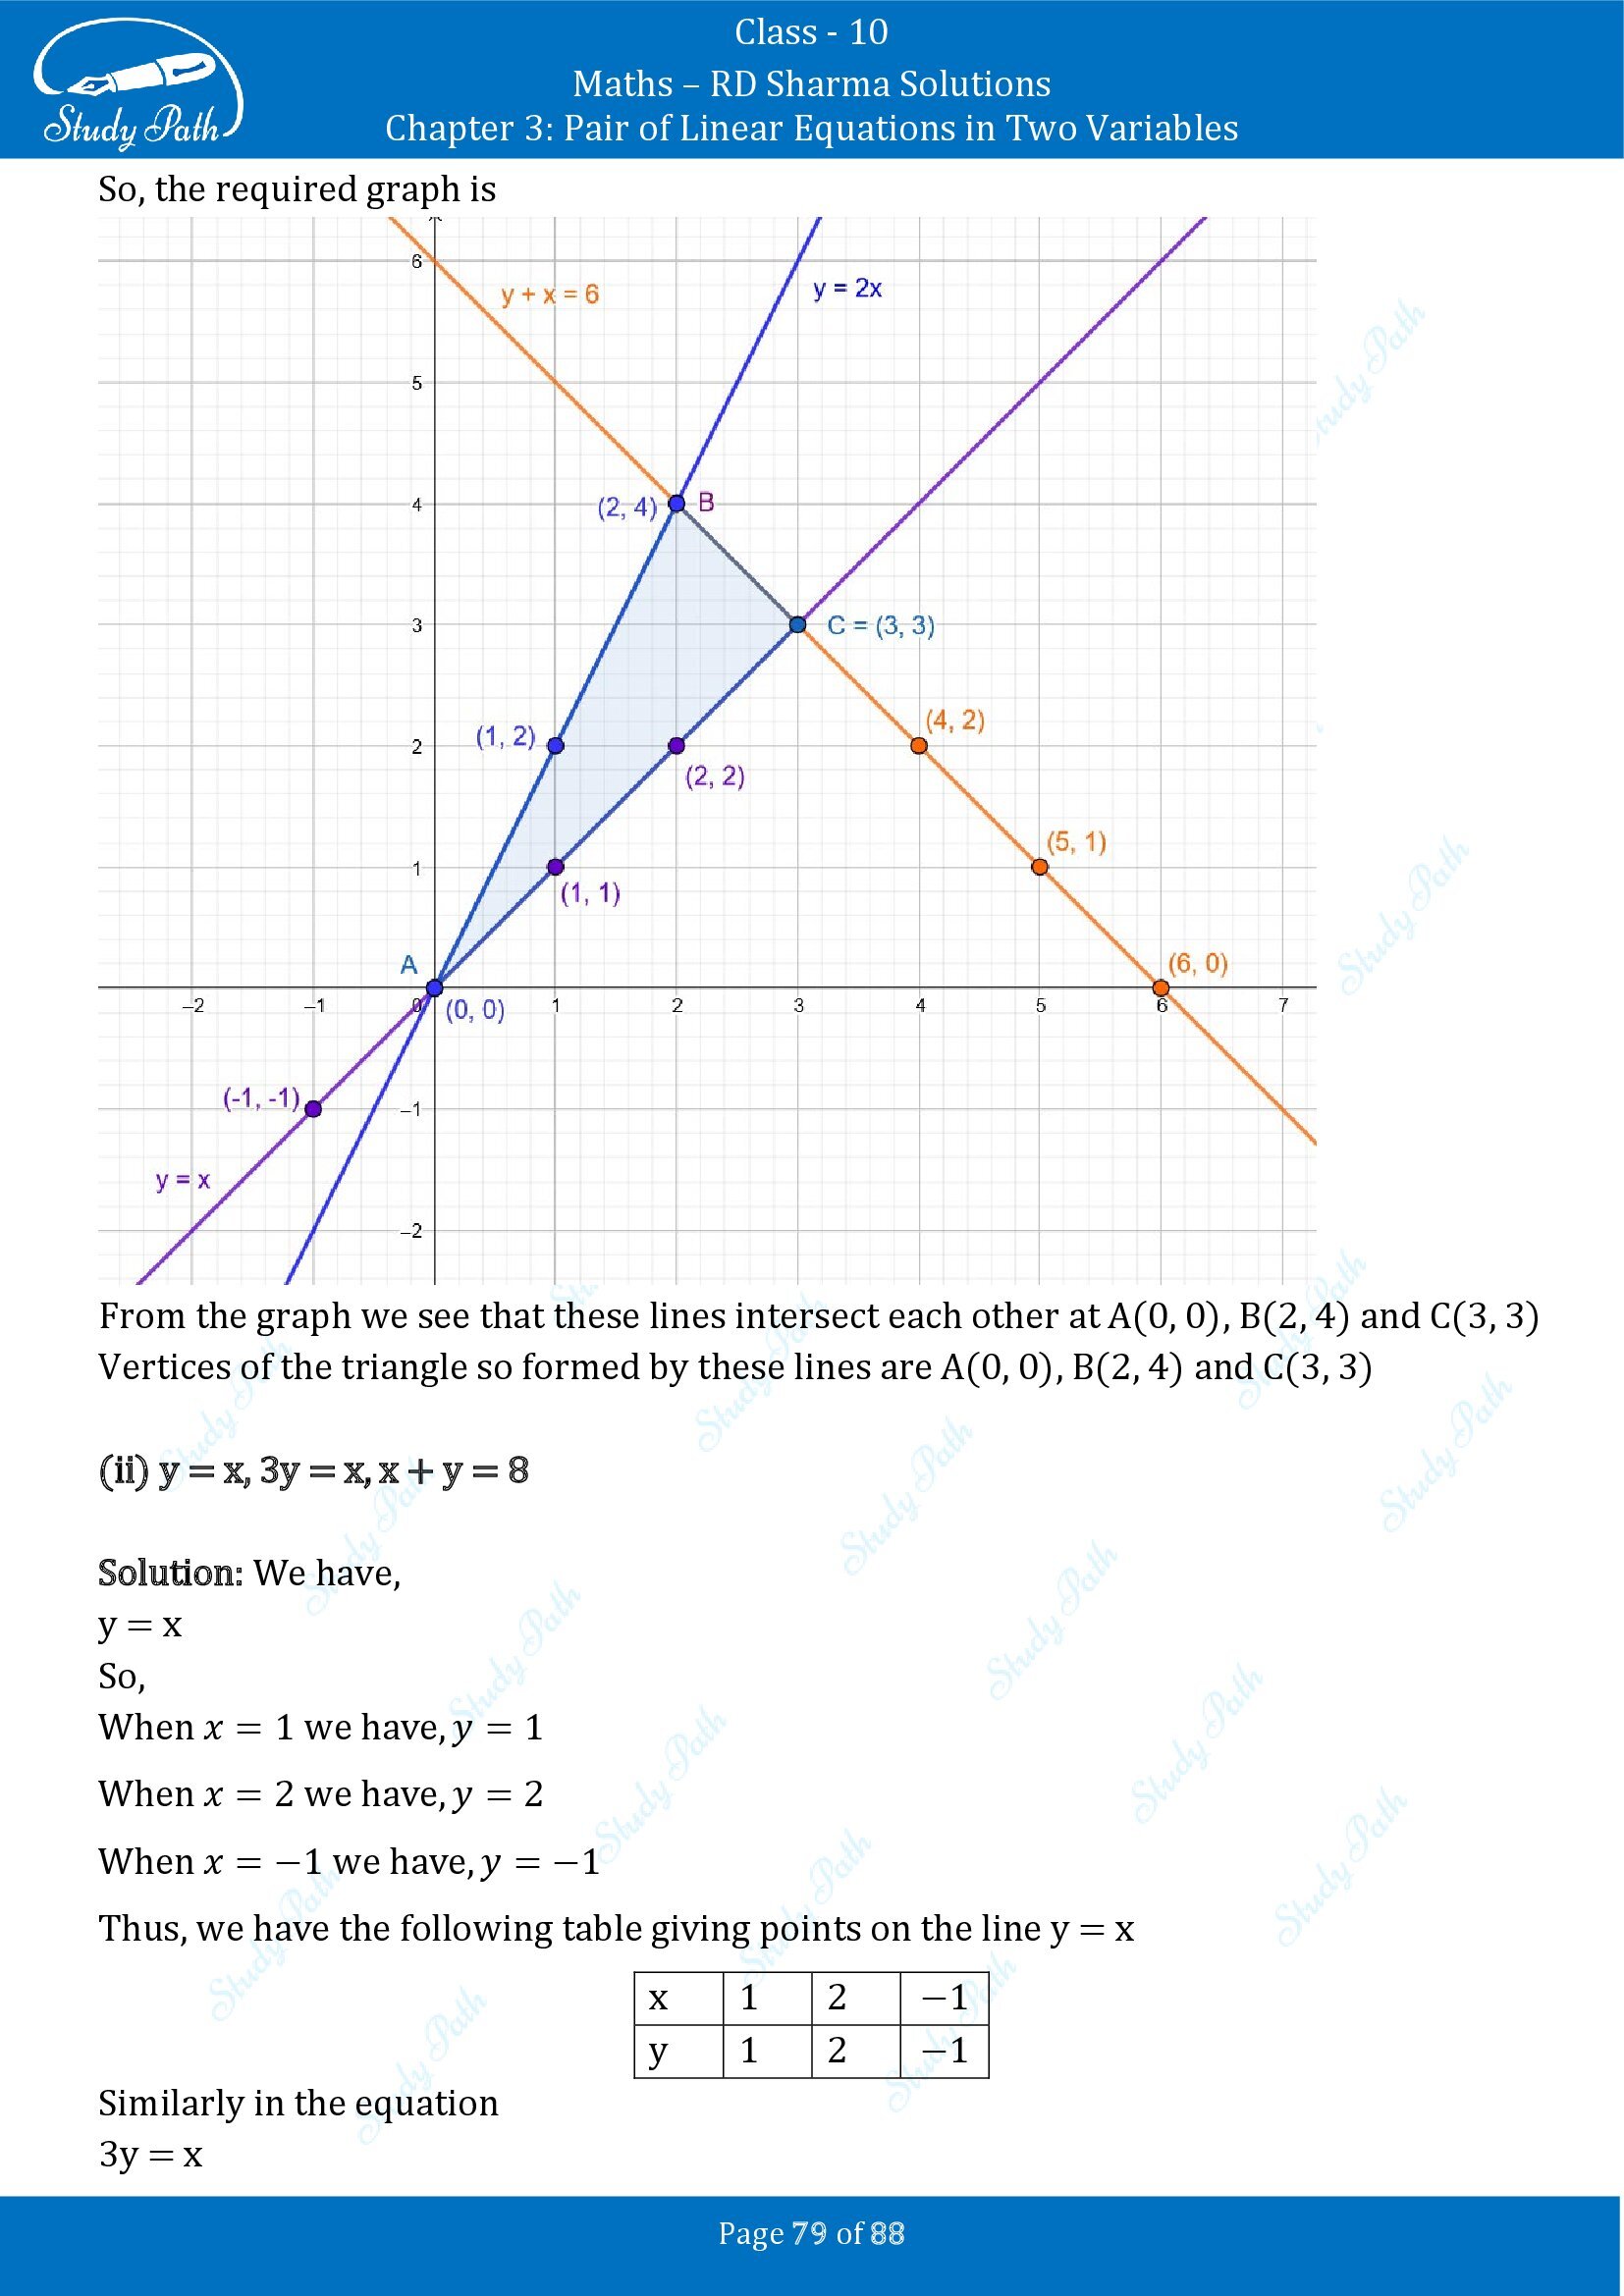 RD Sharma Solutions Class 10 Chapter 3 Pair of Linear Equations in Two Variables Exercise 3.2 00079